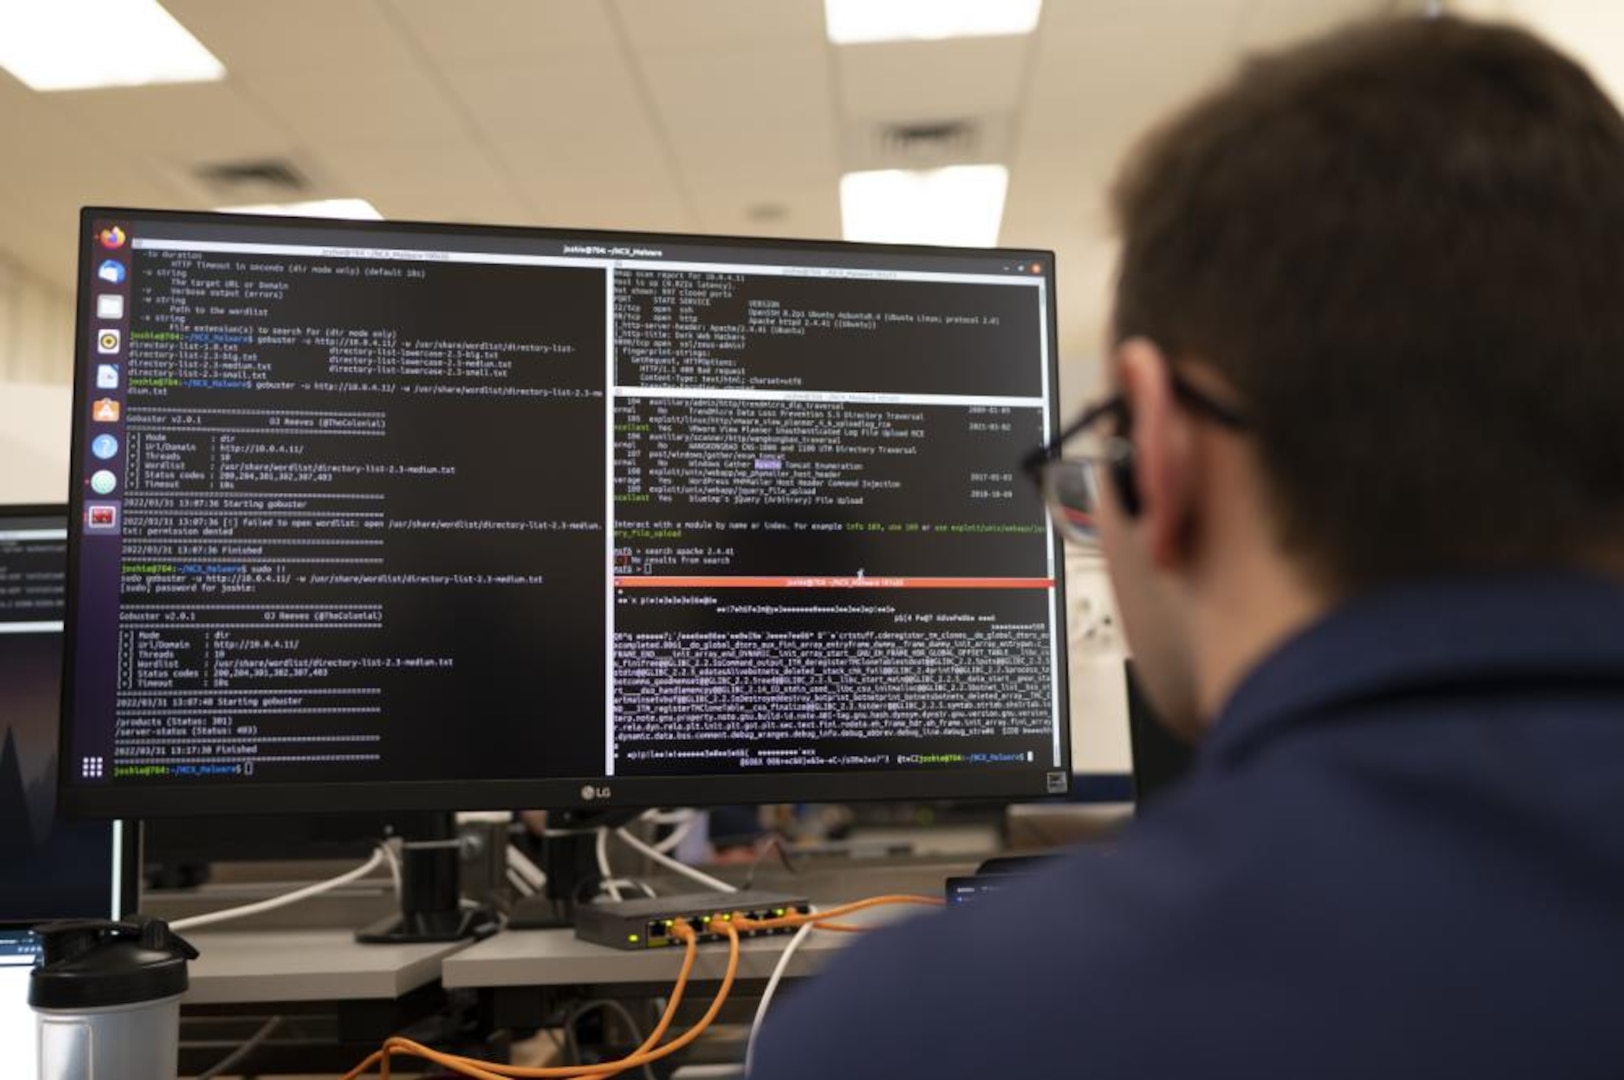 A U.S. Coast Guard Academy cadet, a member of the Academy's cyber team looks at his computer while participating in the National Security Agency's (NSA) annual cyber exercise (NCX), here, Mar. 31, 2022. The Academy's cyber team won third place out of 12 total teams. (U.S. Coast Guard photo by Petty Officer 3rd Class Matthew Abban)